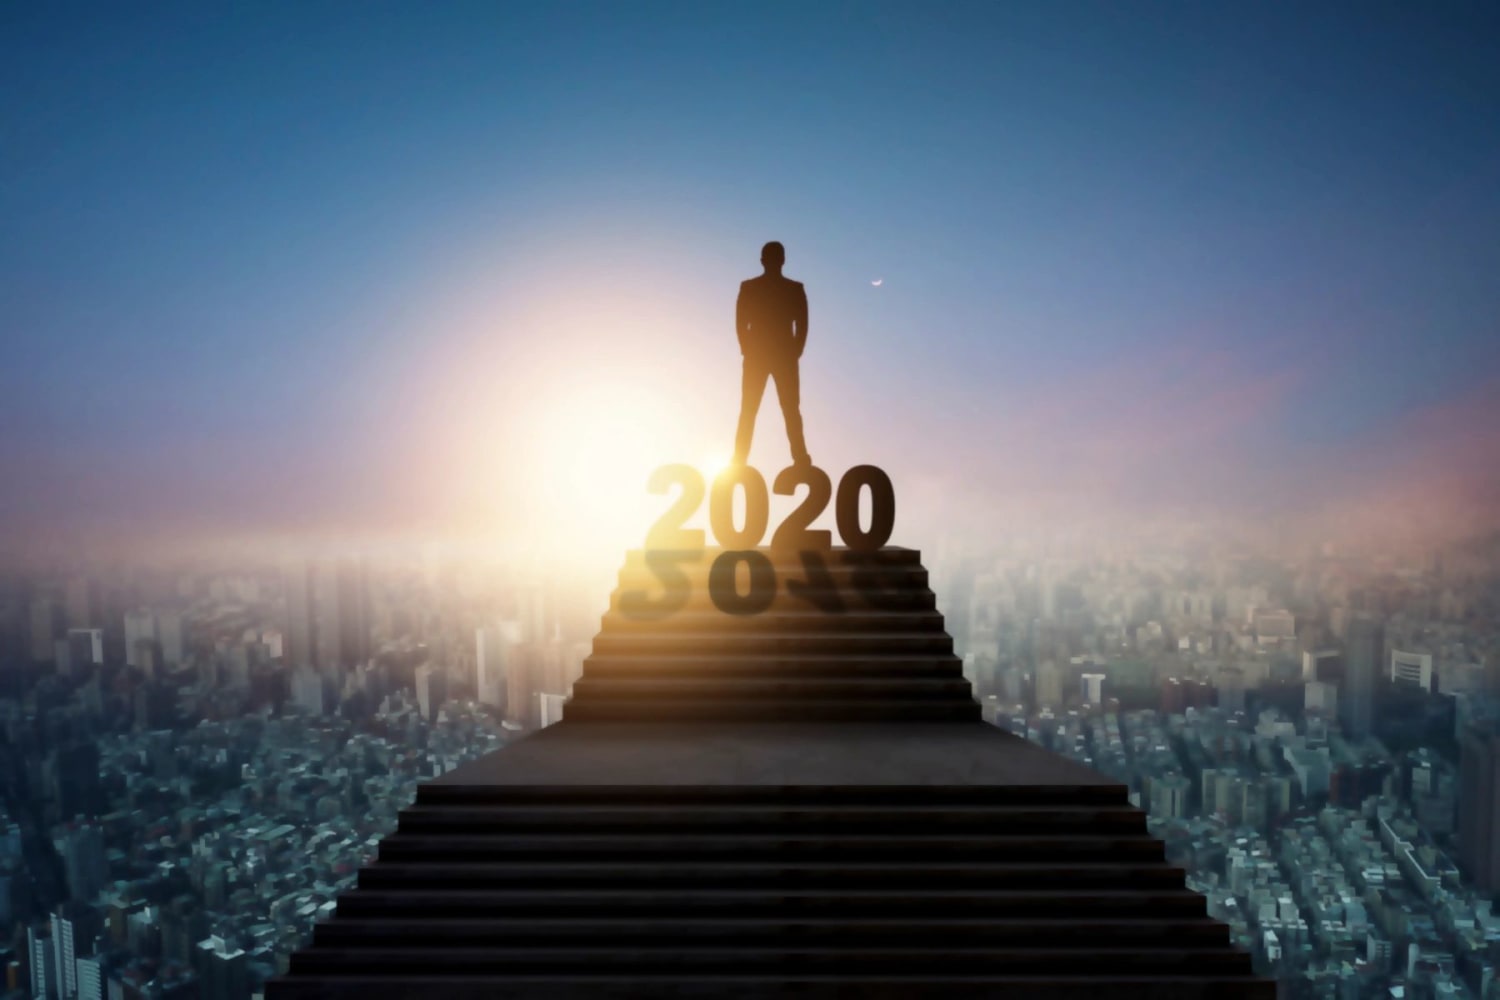 20 Ways To Build Your Business in 2020